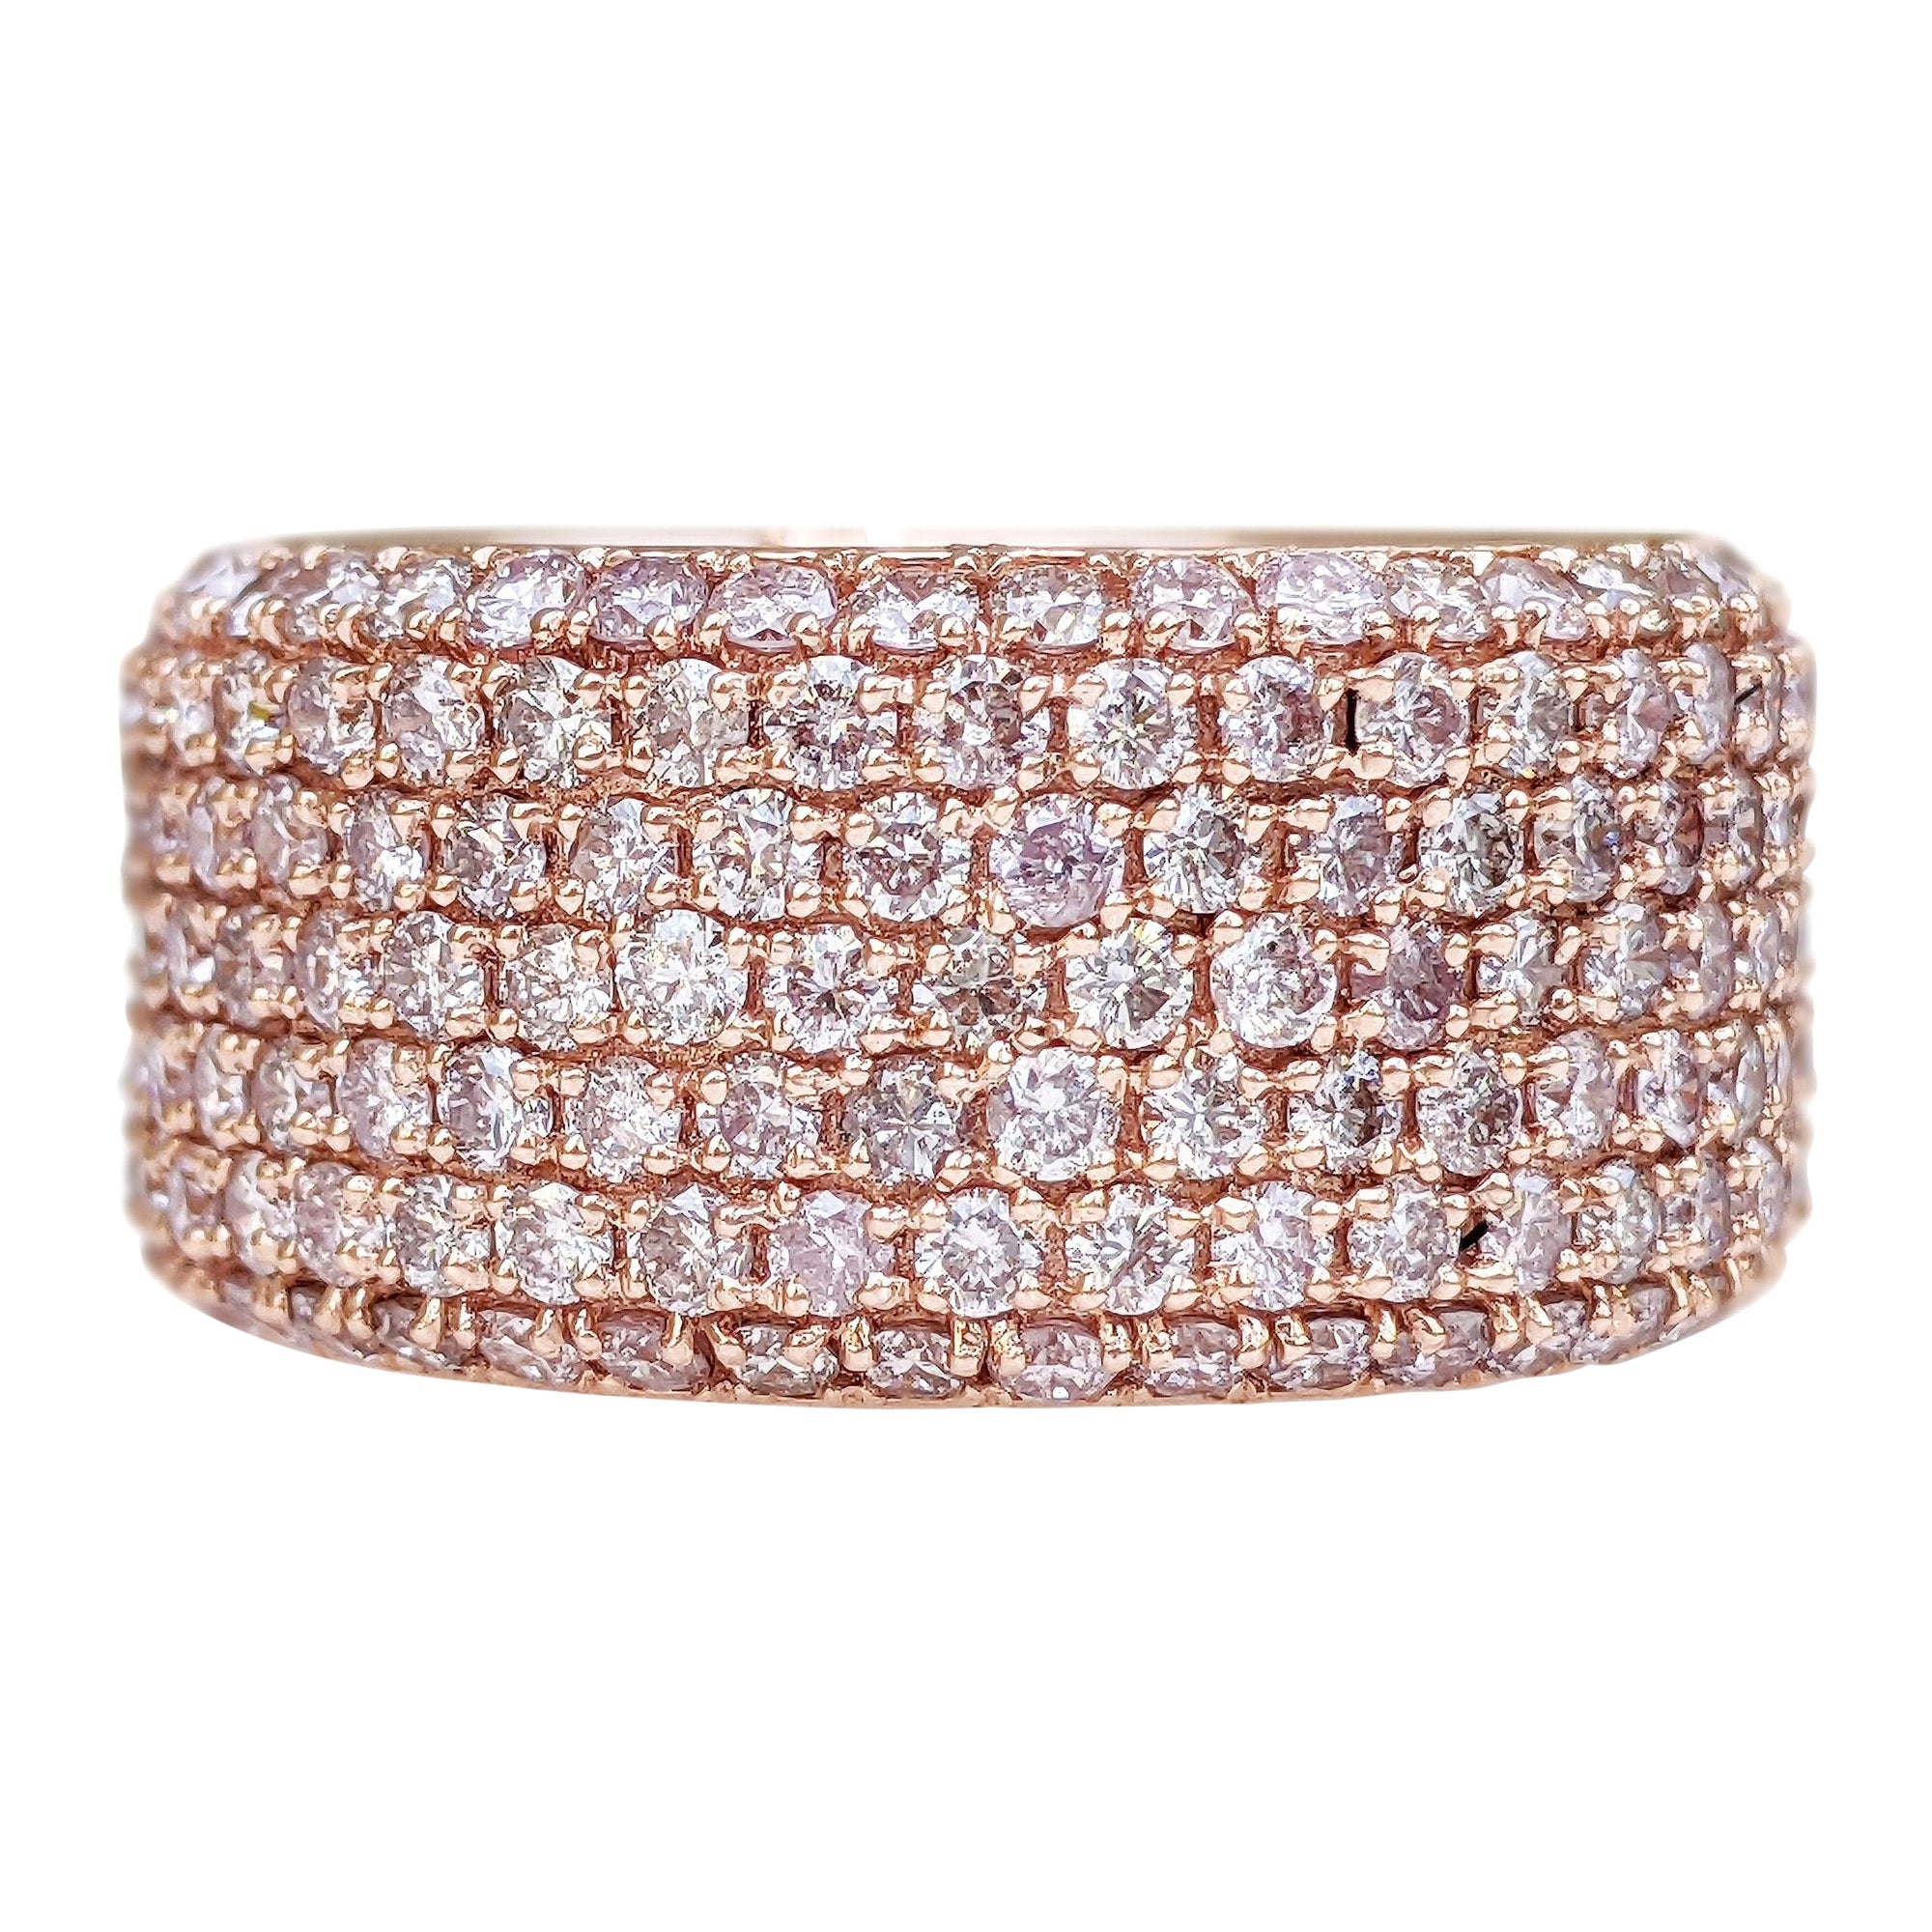 NO RESERVE! 4.30 Carat Fancy Pink Diamonds Eternity Band Pink gold - Ring